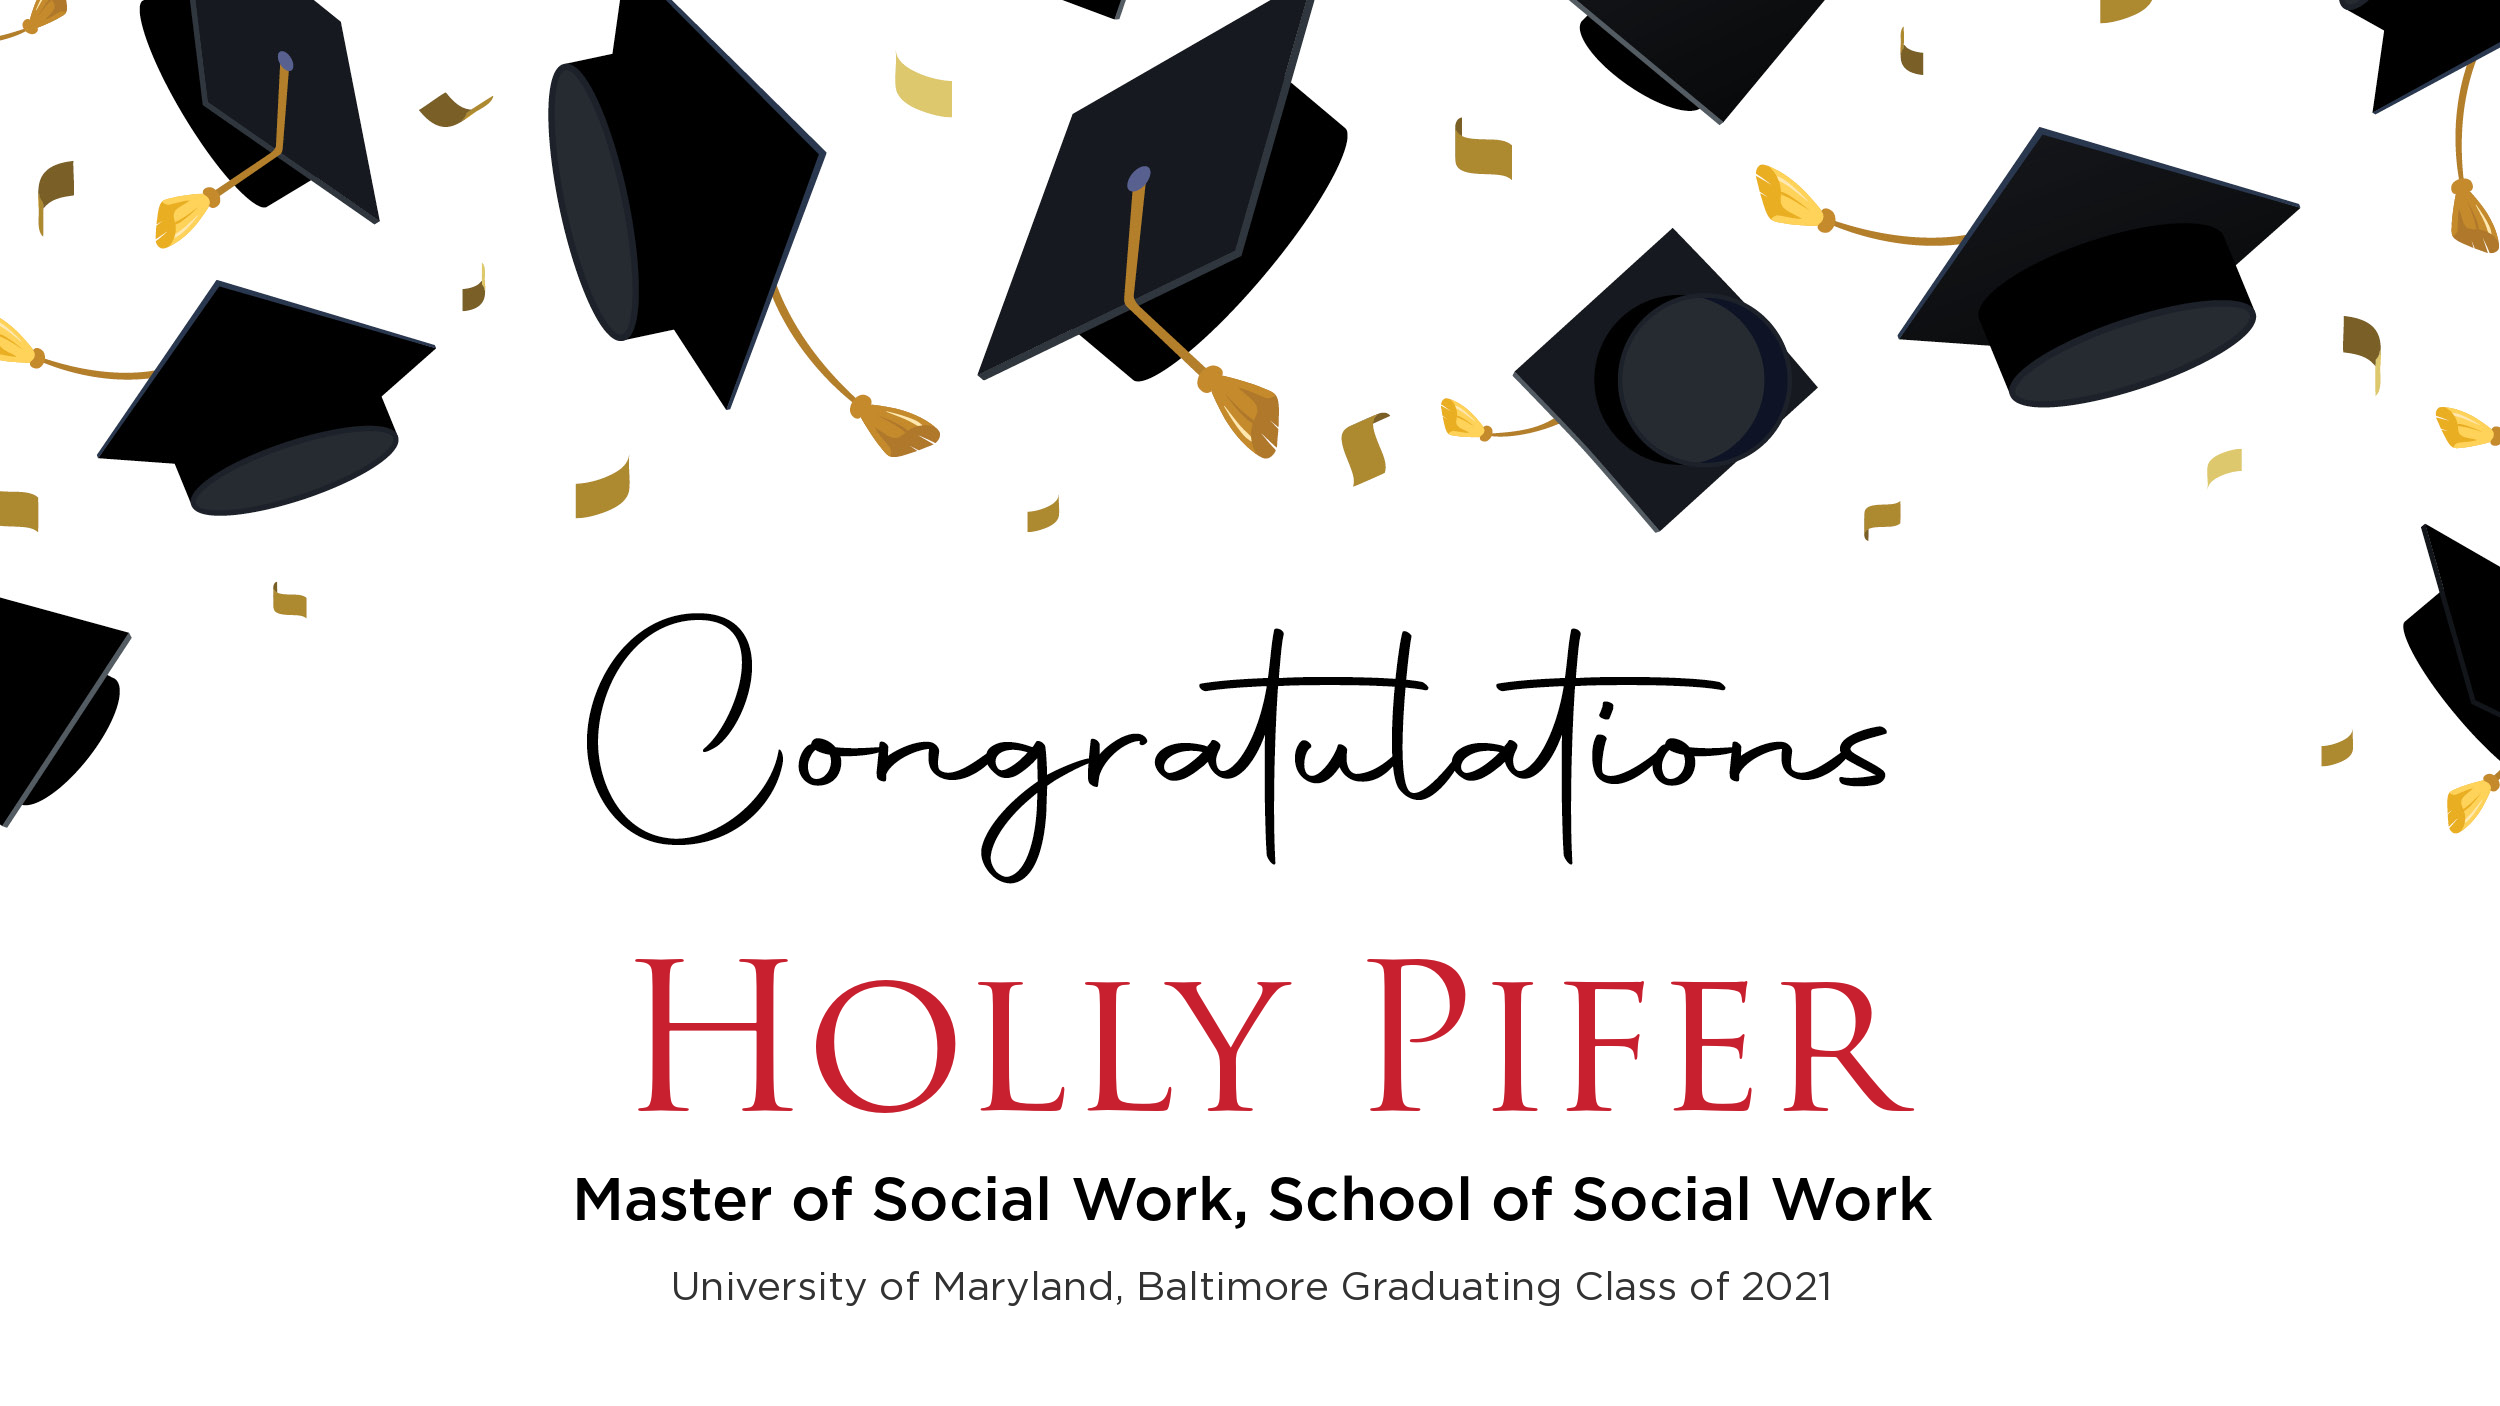 Congratulations Holly Pifer, Master of Social Work